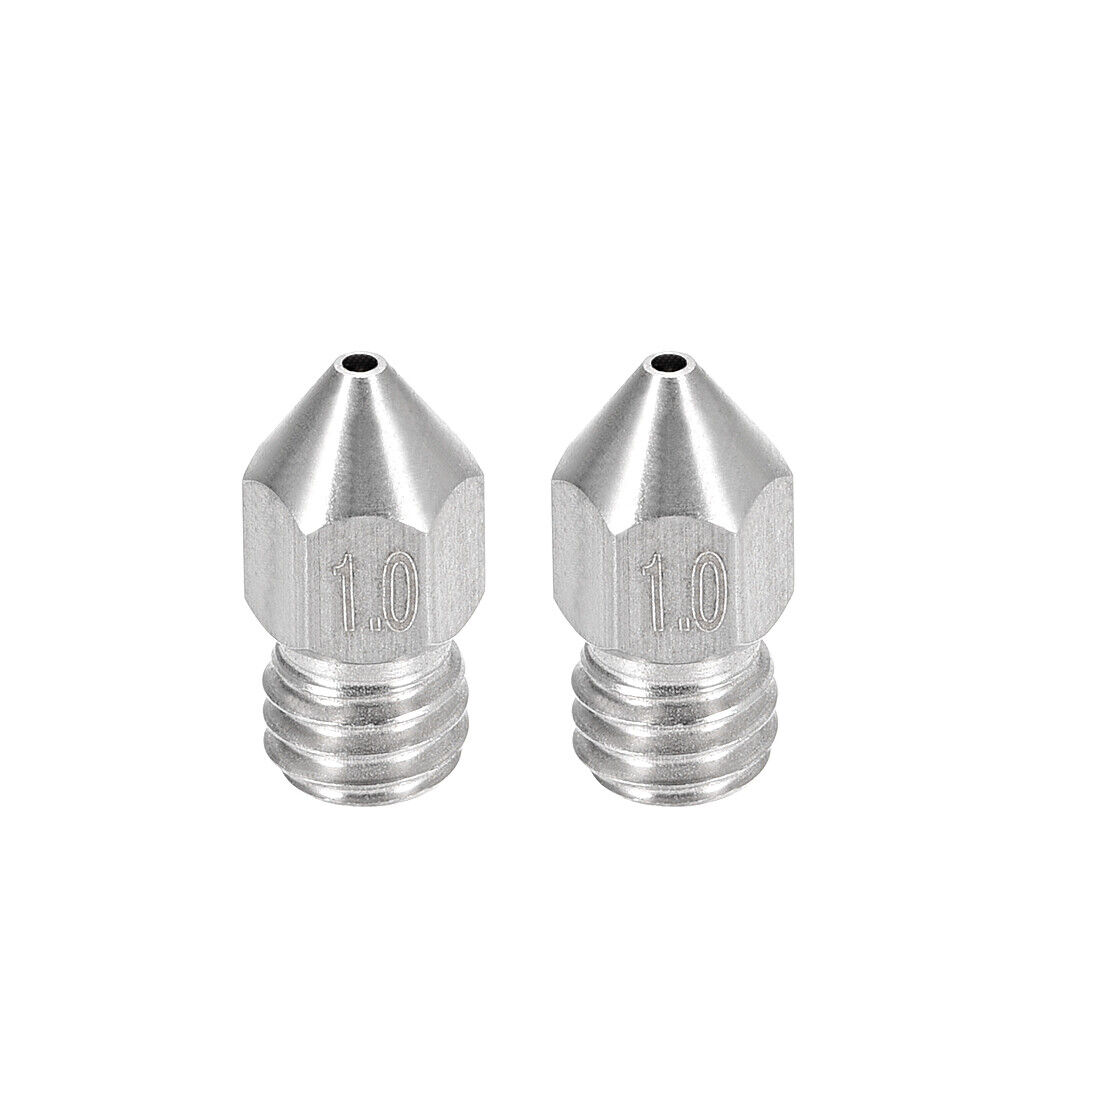 2pcs 1mm 3D Printer Nozzle Fit for MK8 1.75mm Filament Stainless Steel